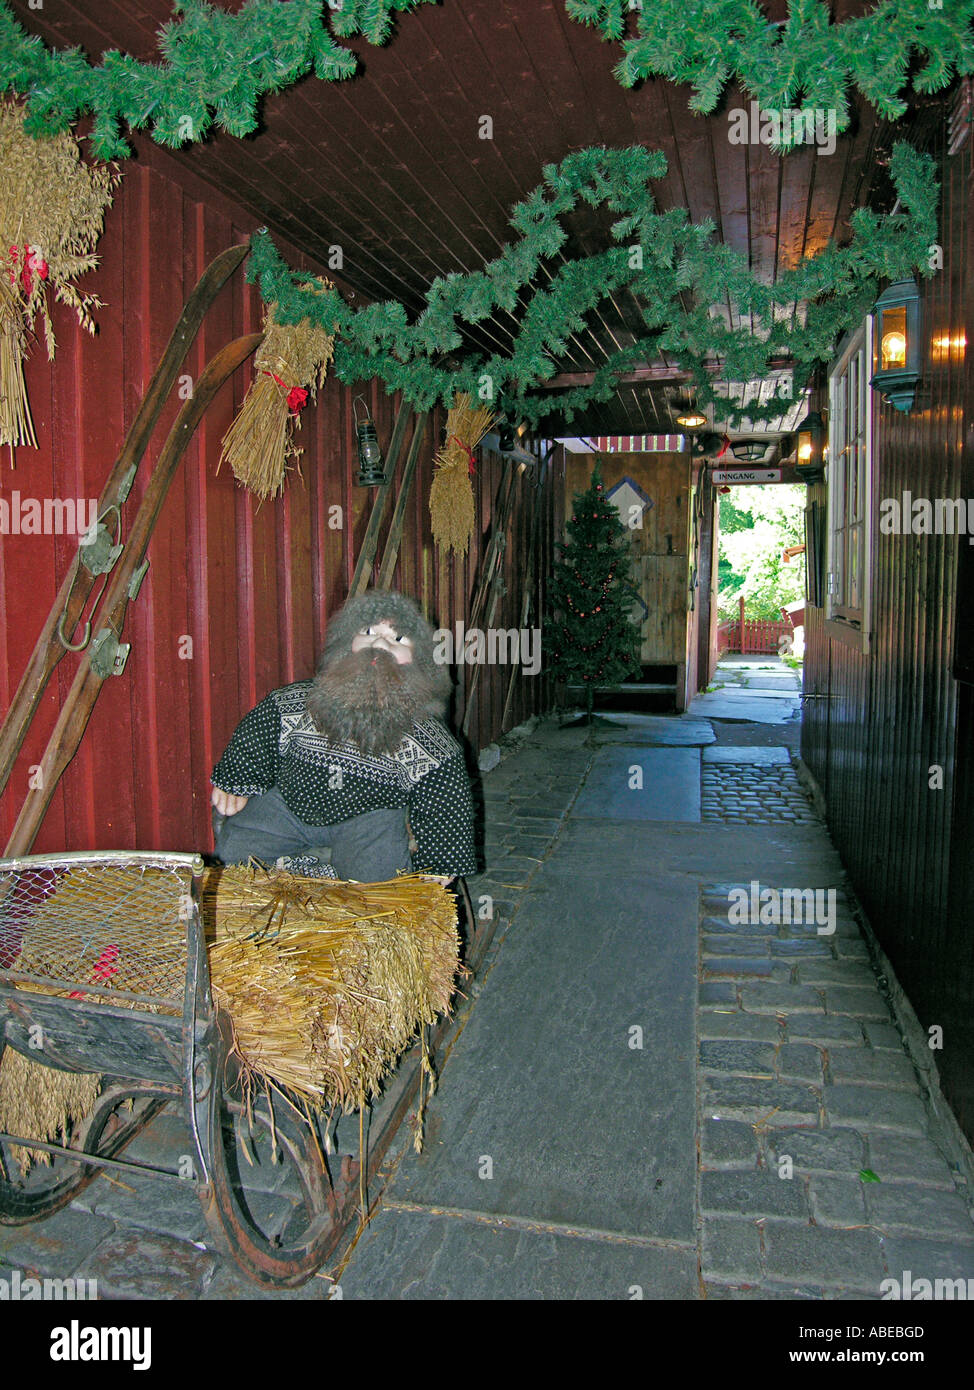 troll bogey gremlin kobold hobgoblin golblin sitting in skid sled in a passage of timber building in Trondheim in the old town Stock Photo